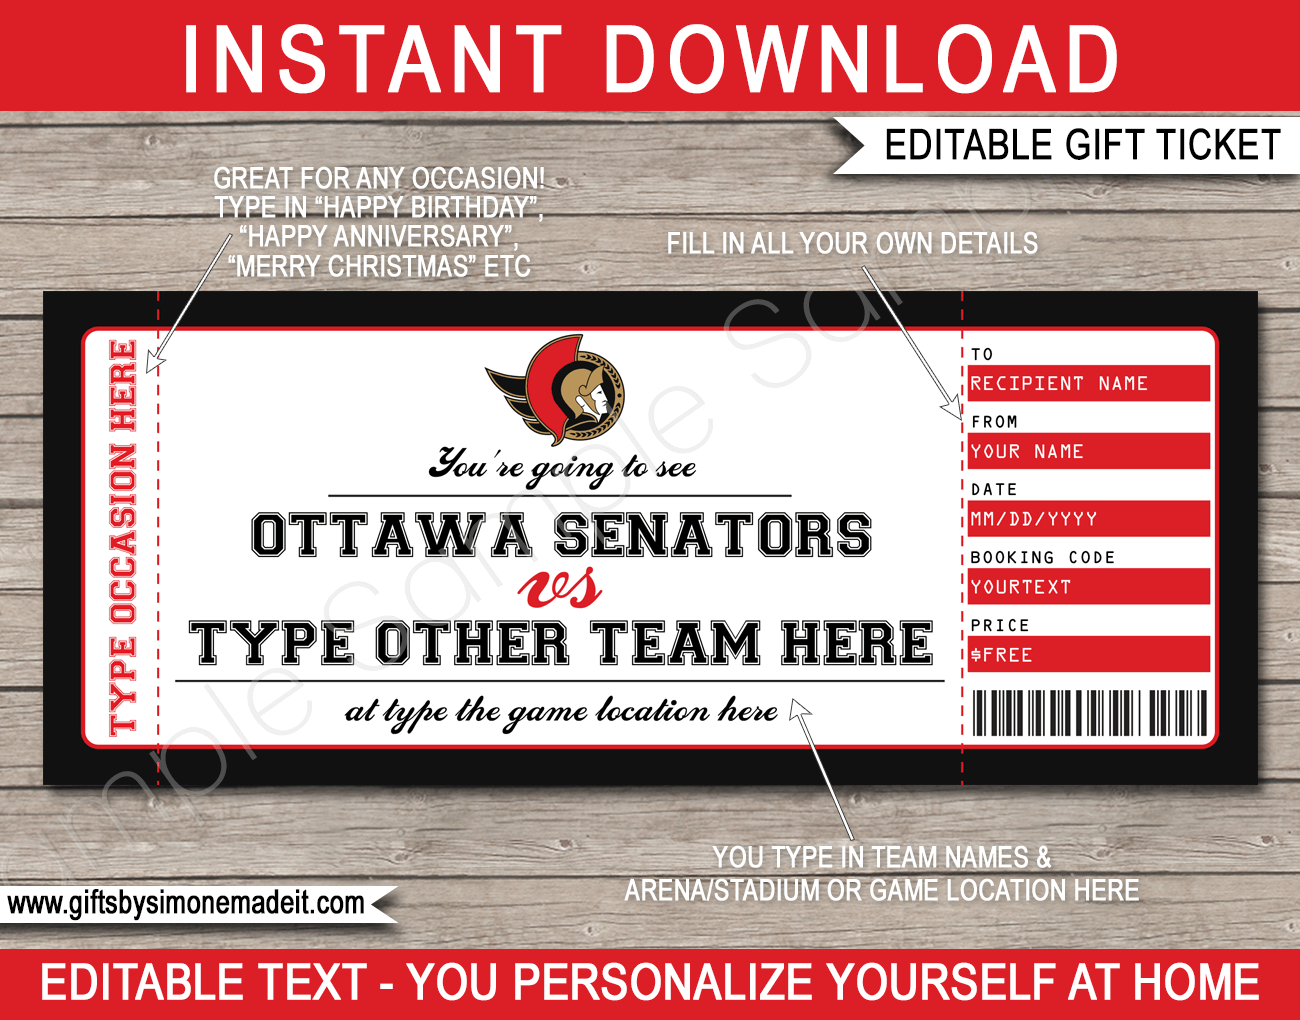 Your official shopping site for the Ottawa Senators Hockey Club